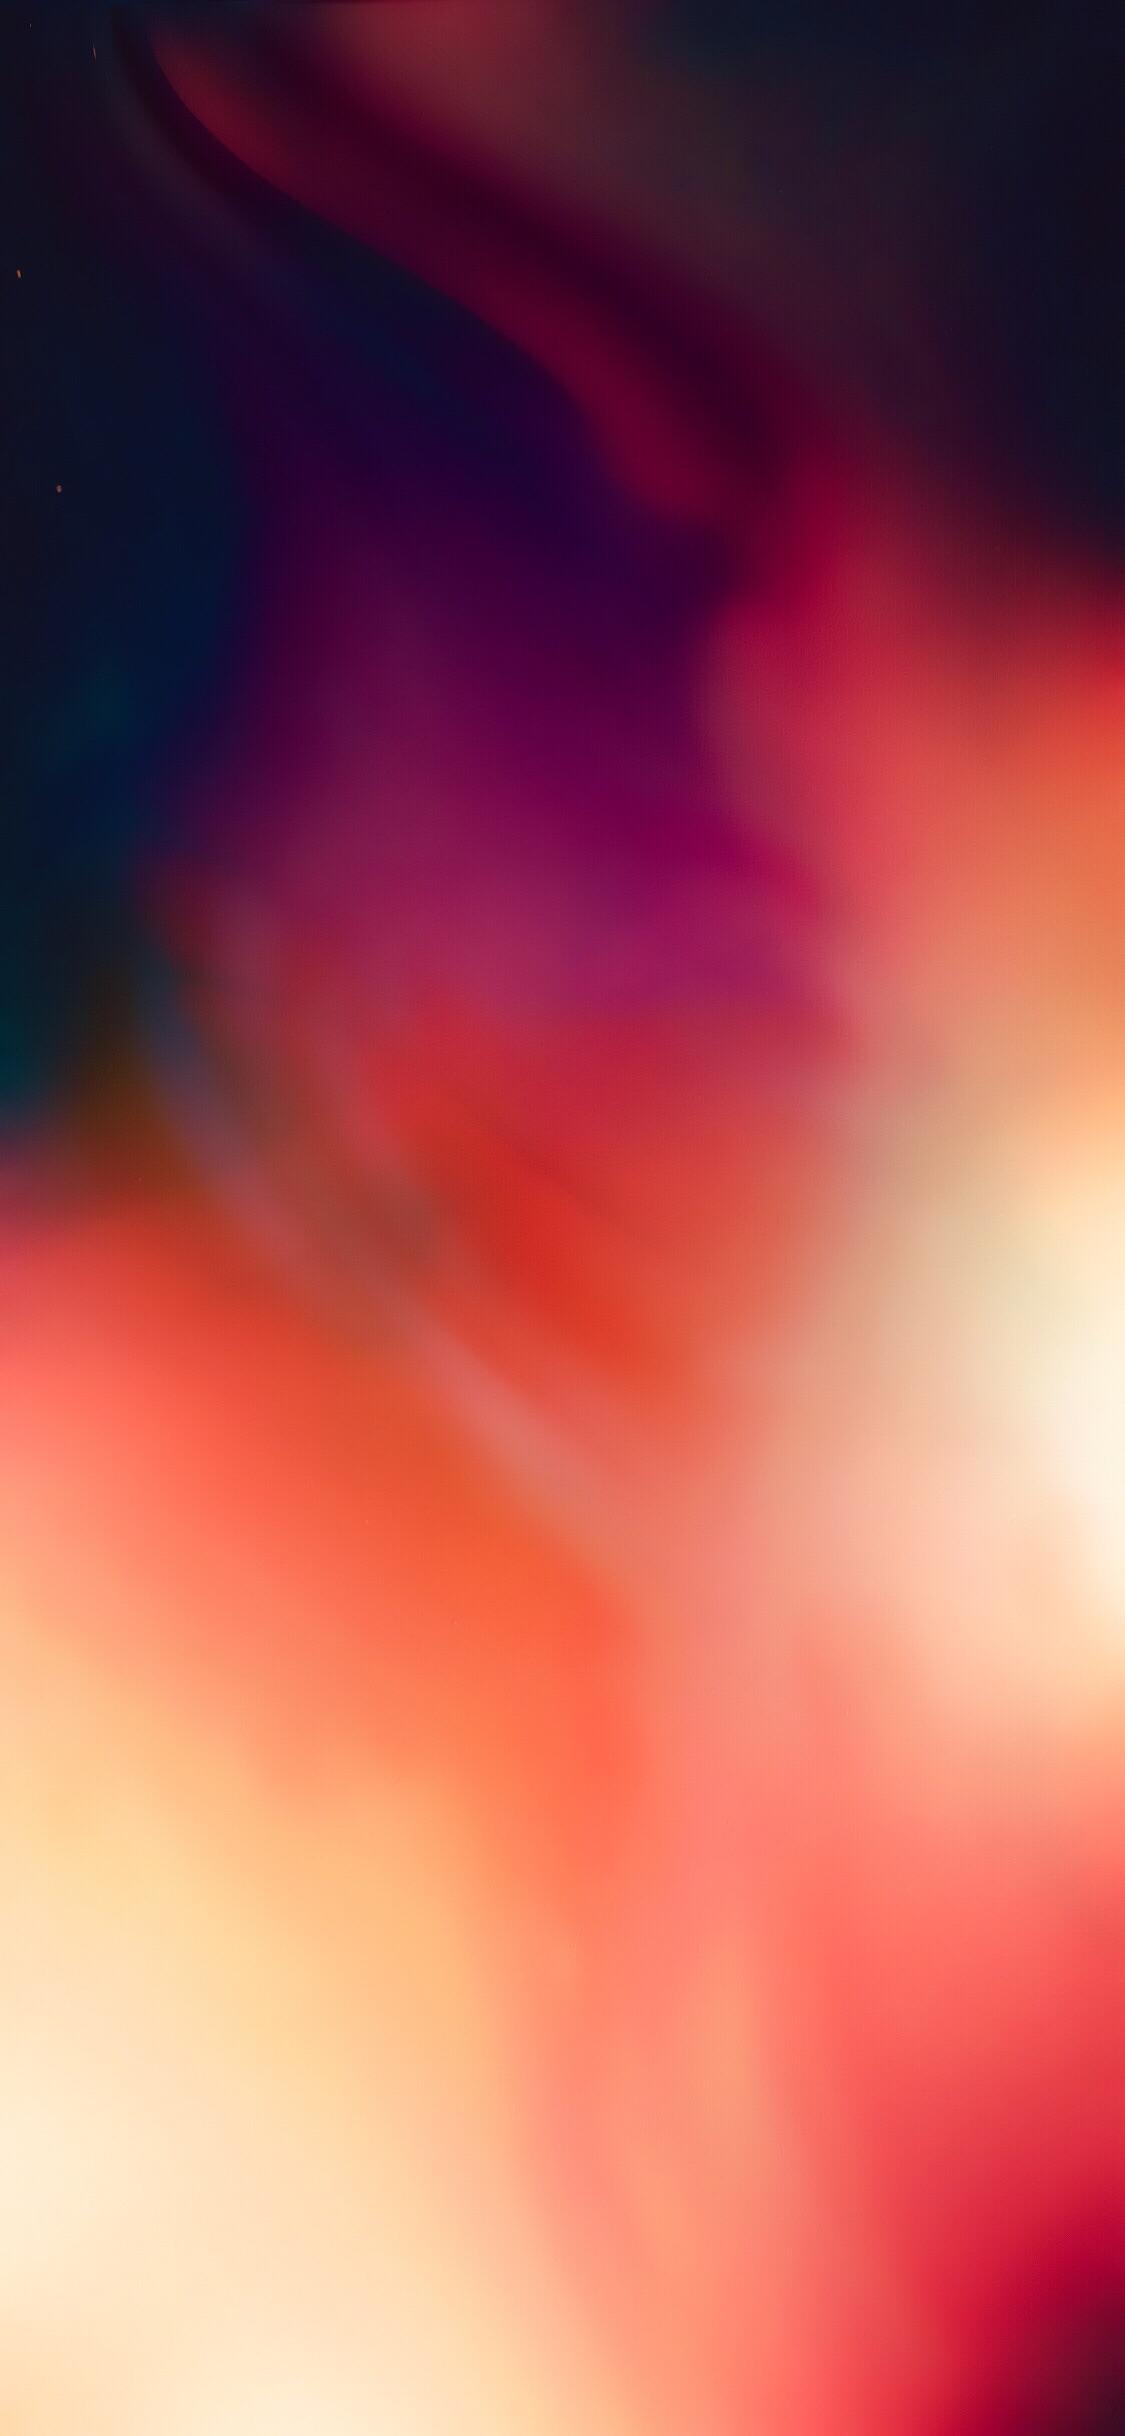 Wallpaper for iphone x iphone